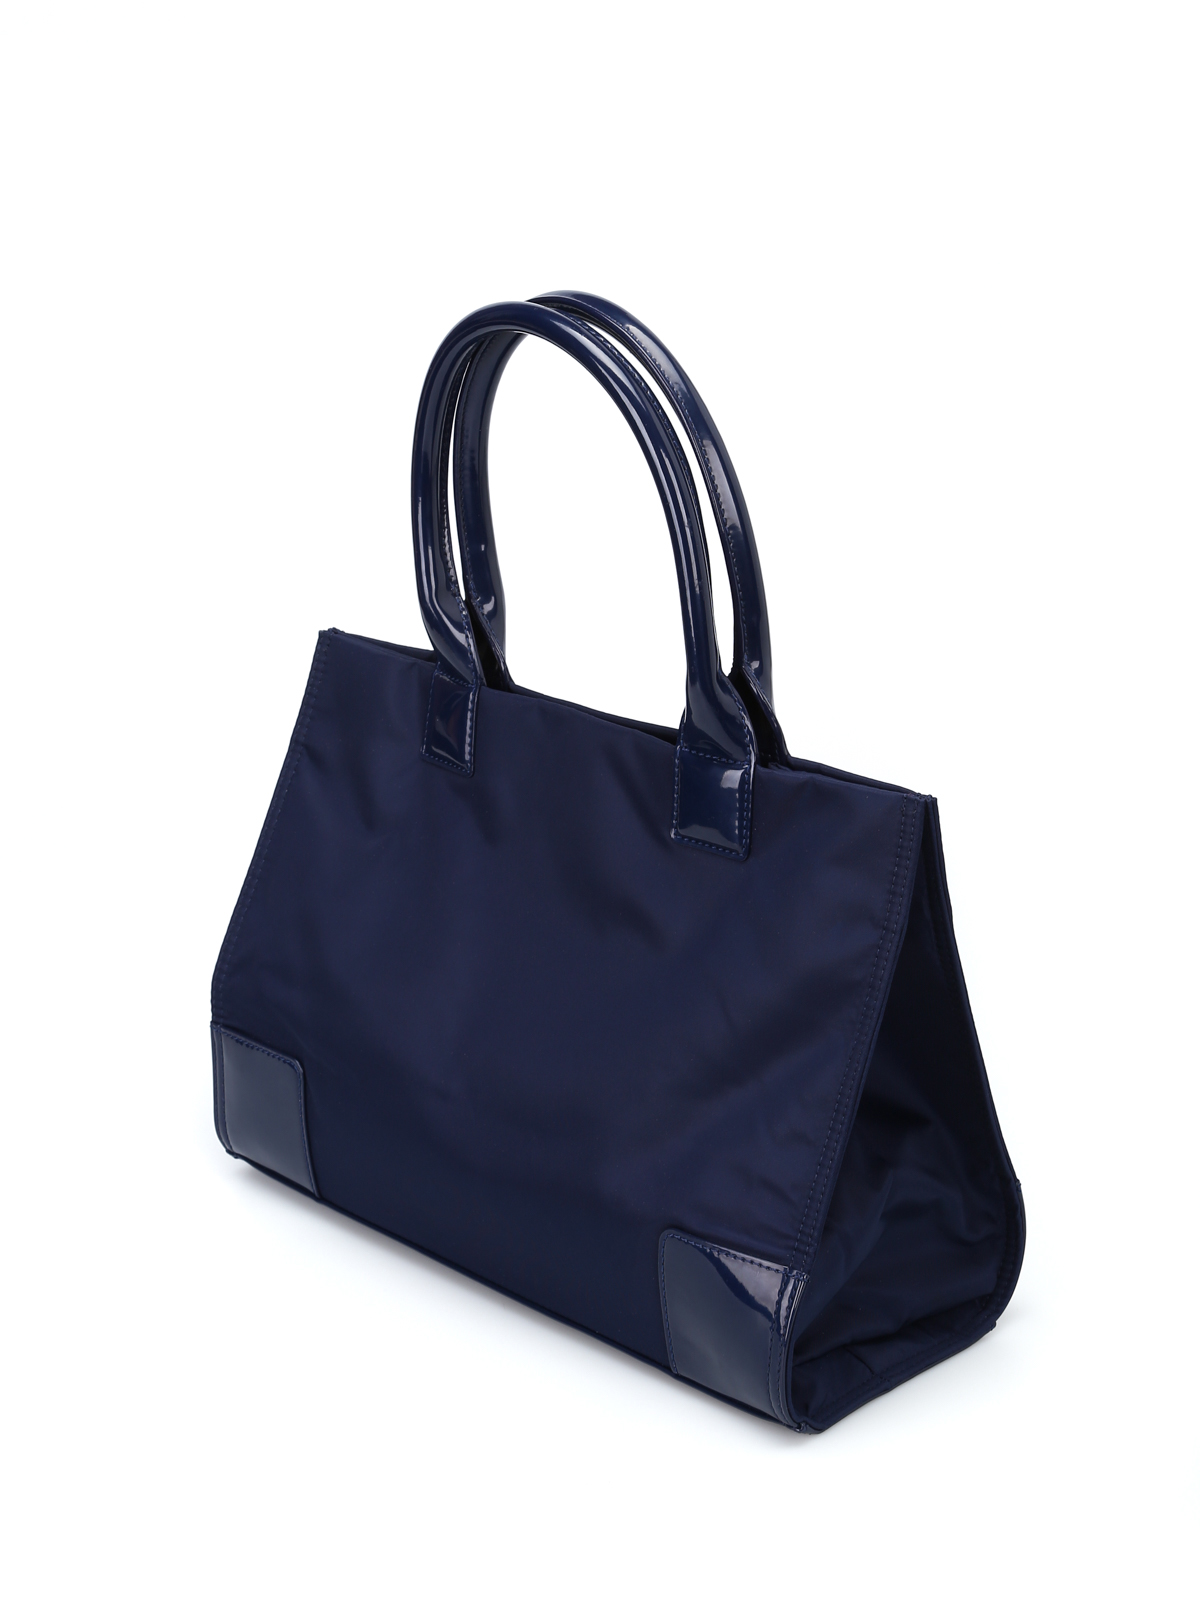 Tory Burch Blue Nylon and Leather Ella Tote Tory Burch